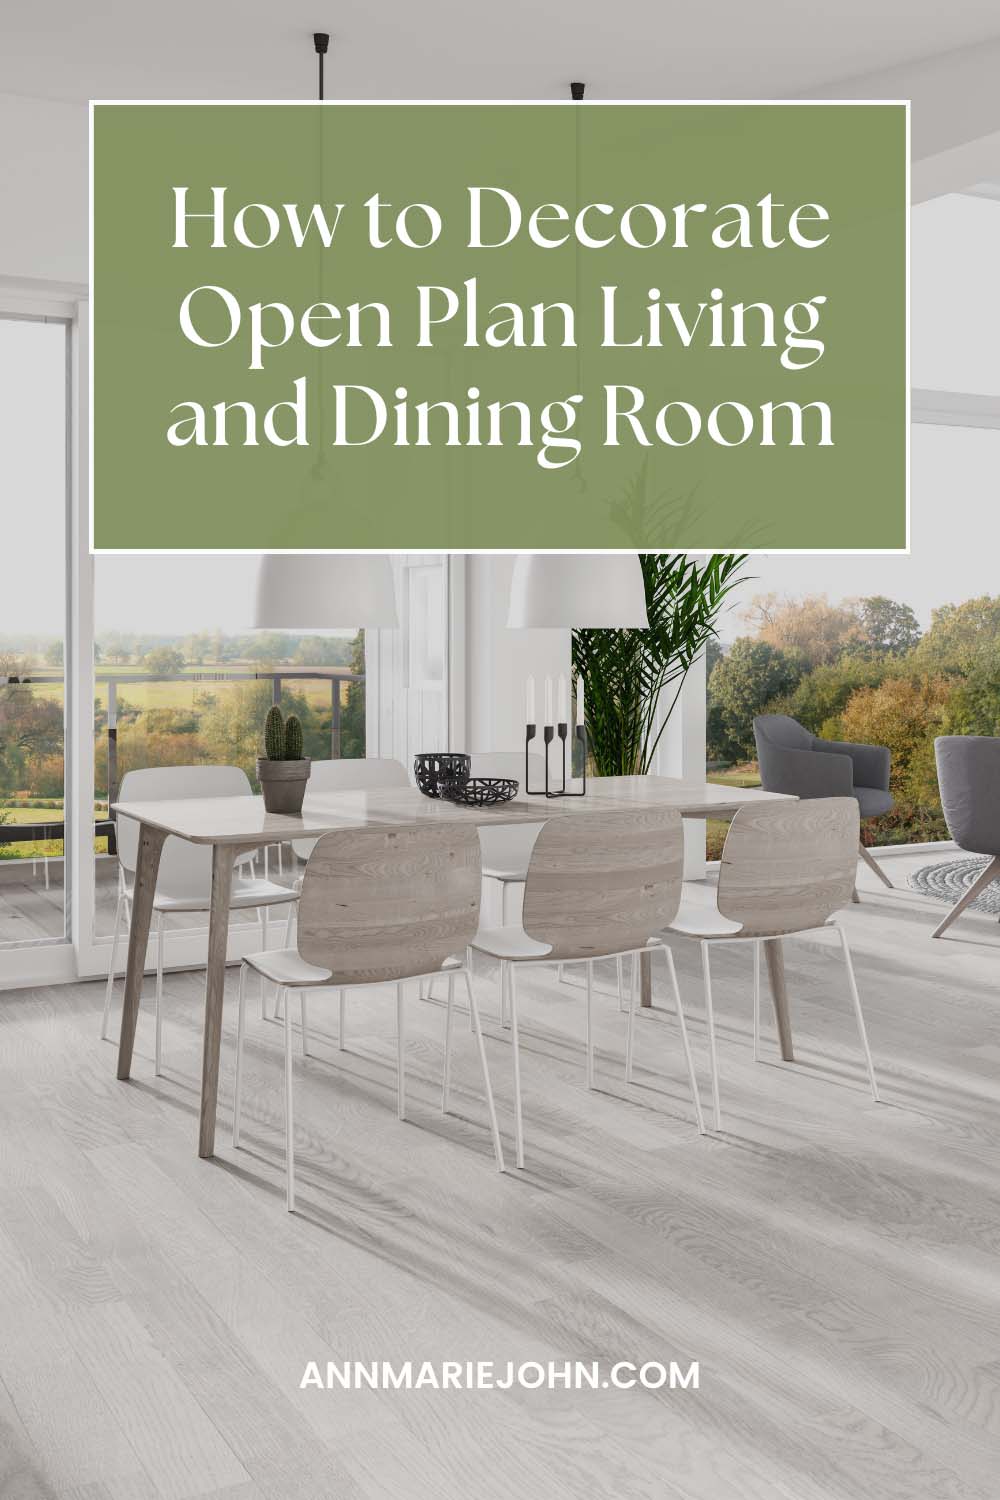 How to Decorate Open Plan Living and Dining Room